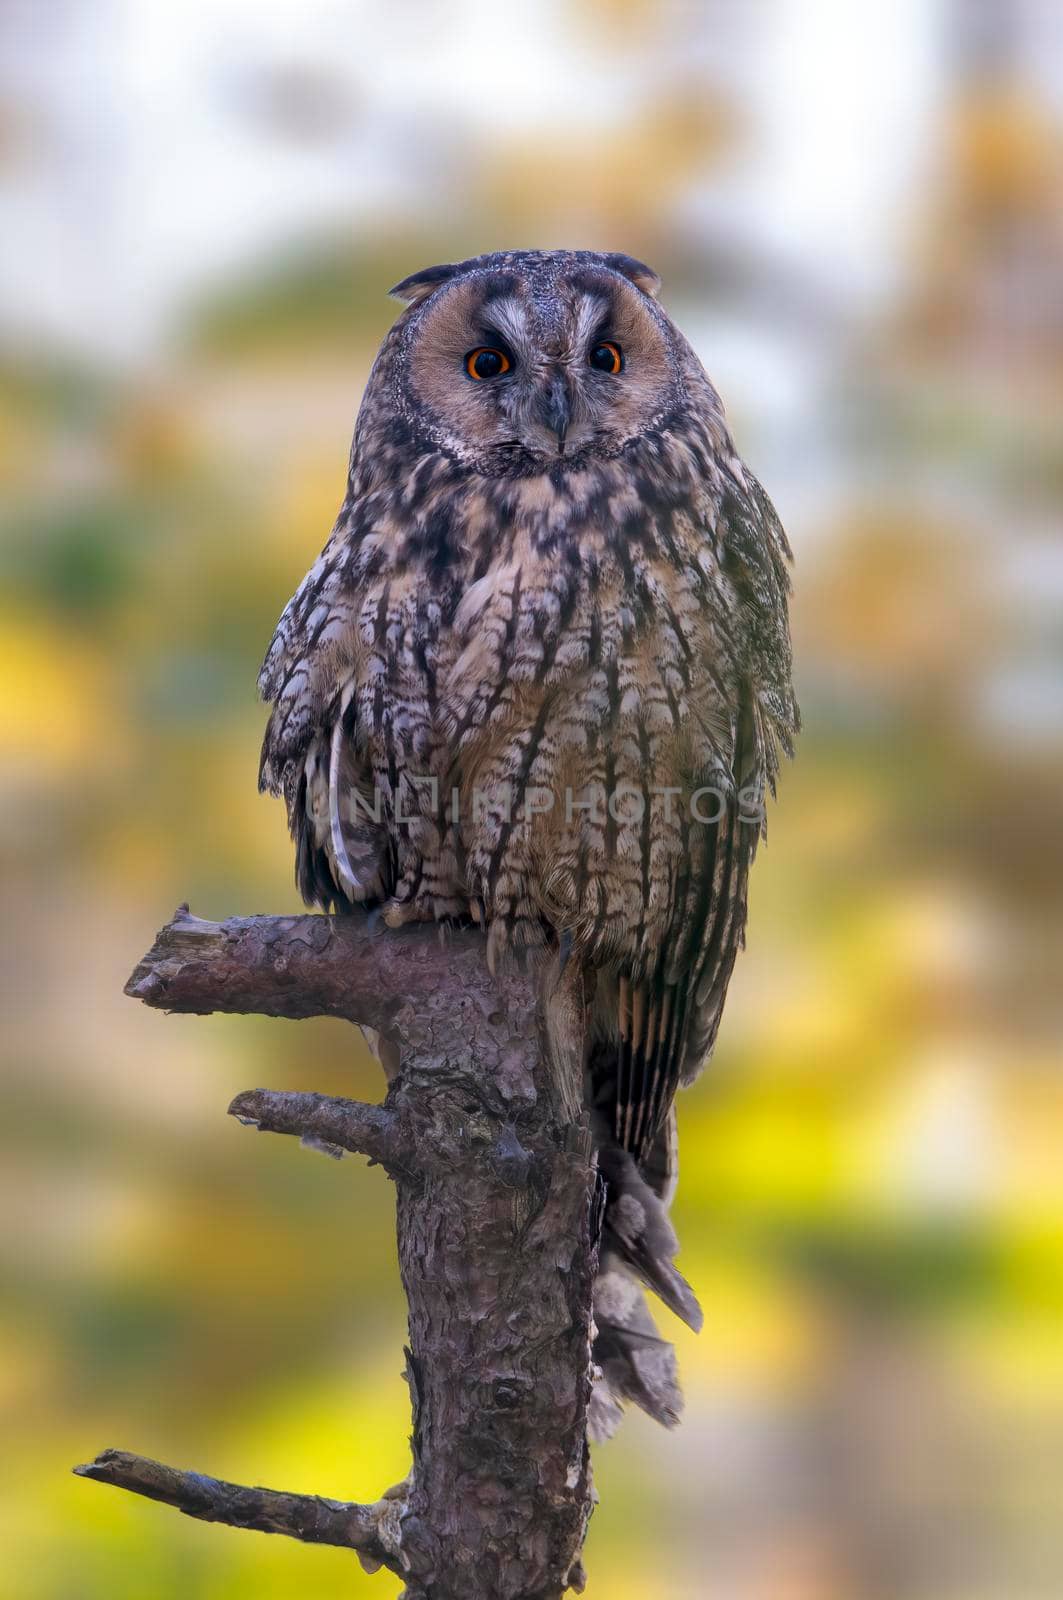 a long-eared owl sits on an old tree trunk by mario_plechaty_photography